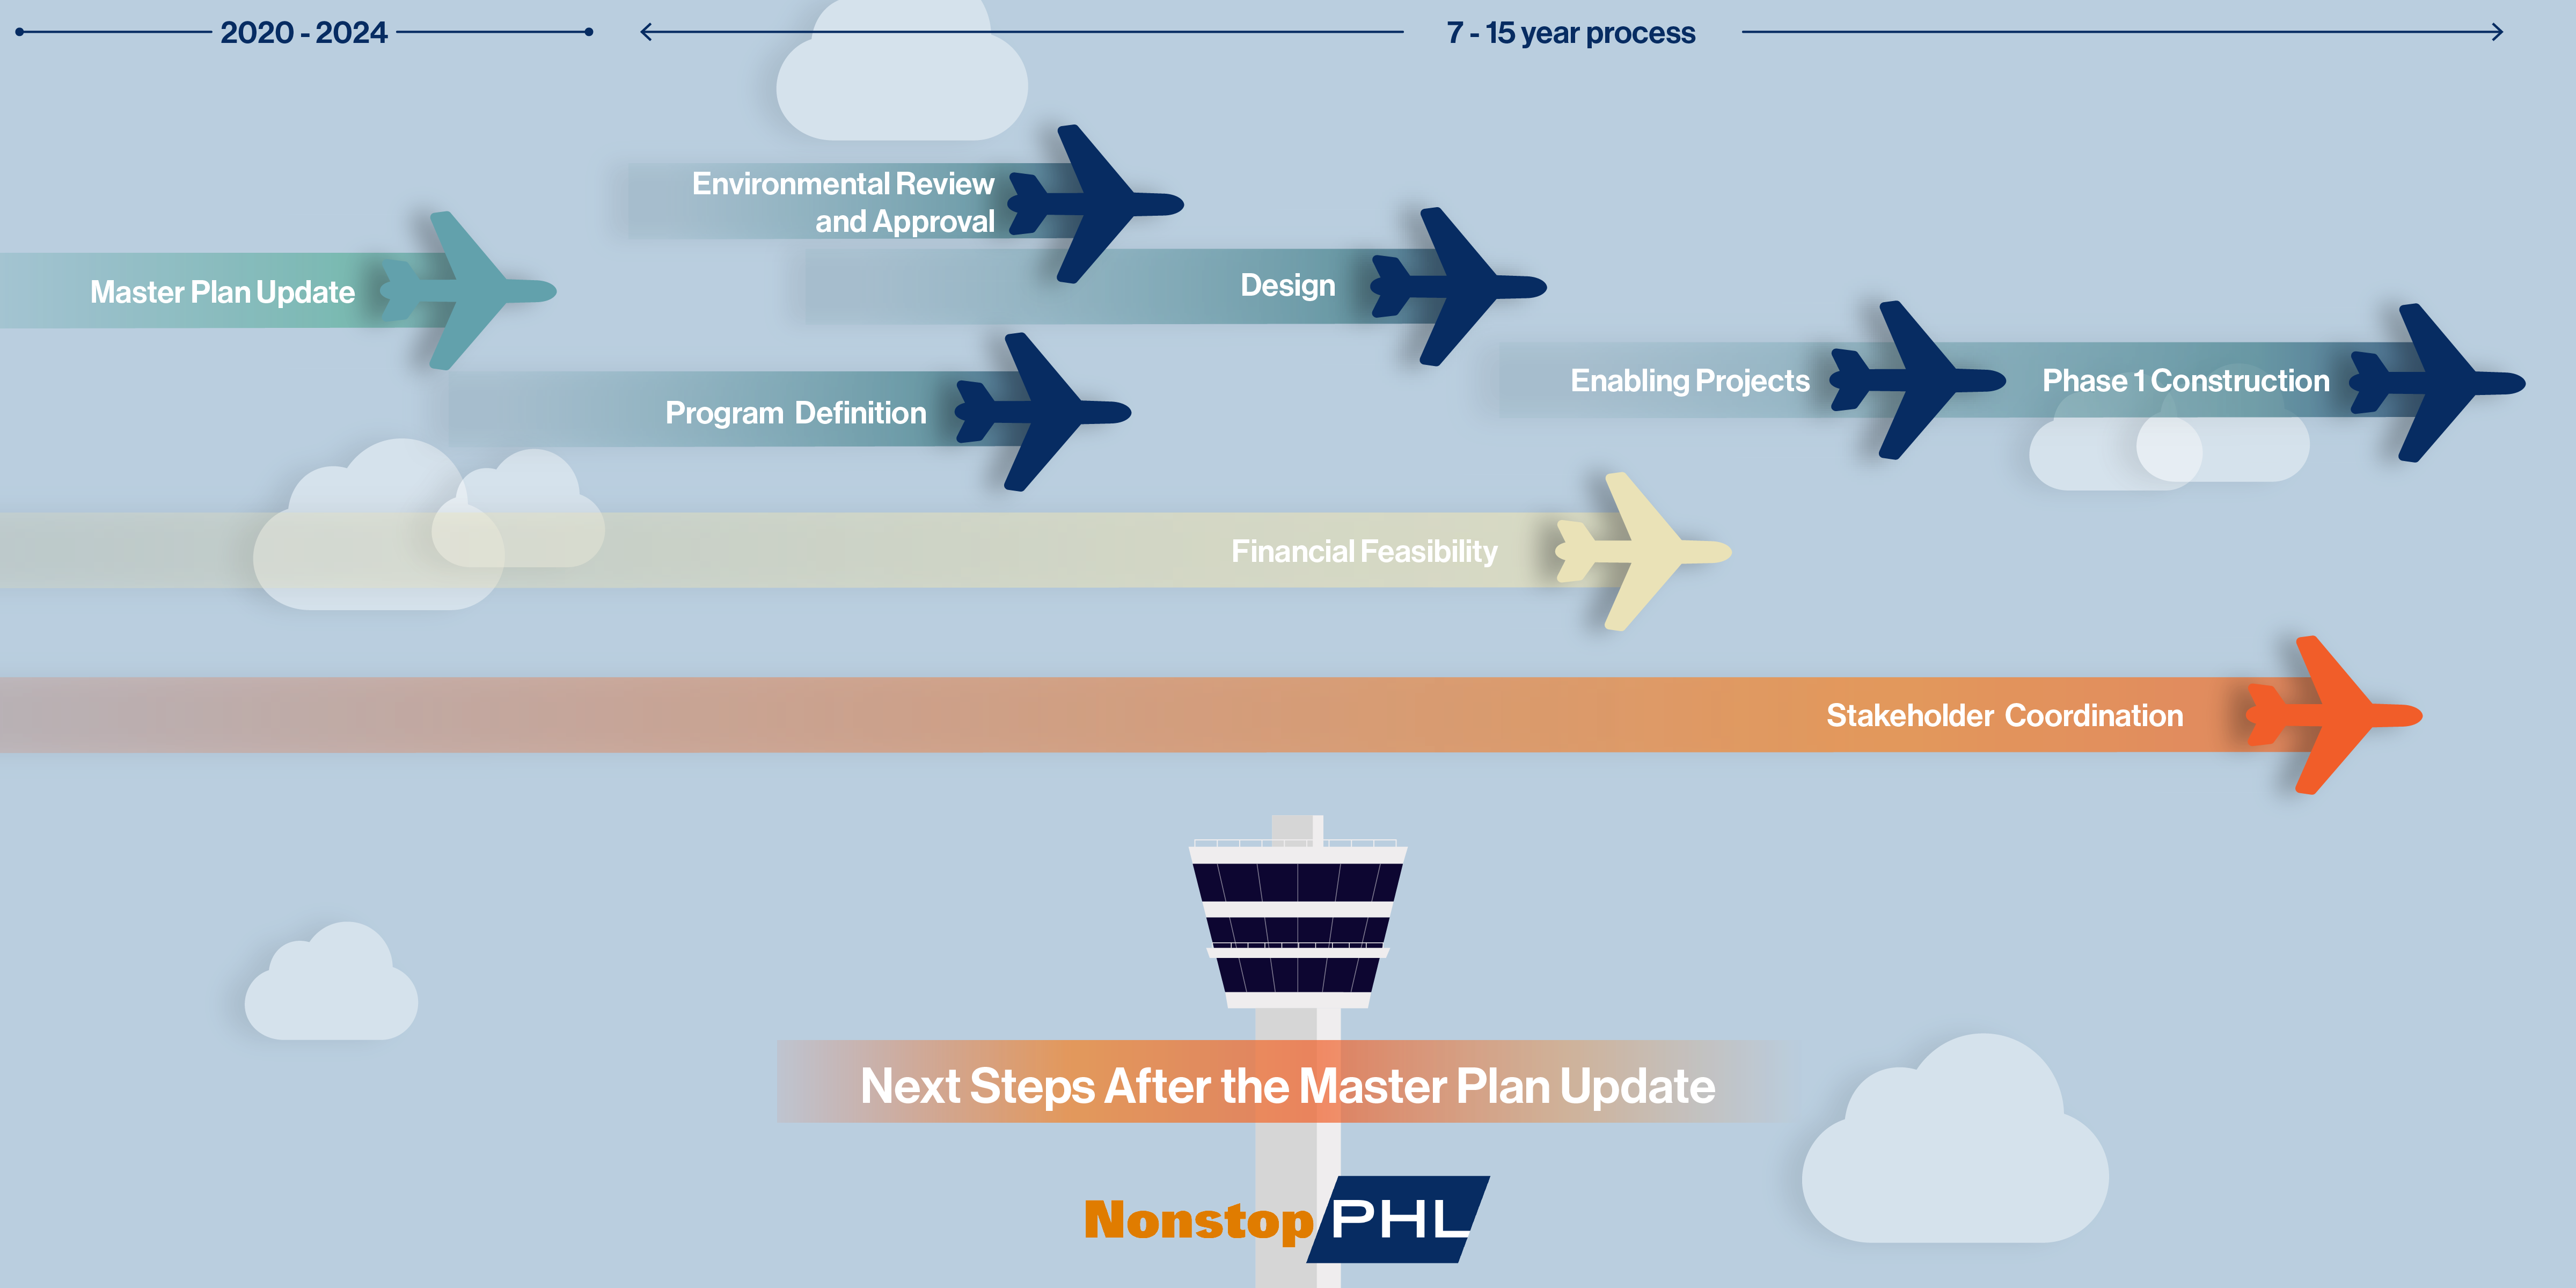 Roadmap of Terminal Development Program Implementation components including the MPU, Program Definition, Environmental Review and Approval, Architectural Design and finally construction, with stakeholder coordination and financial feasibility throughout.